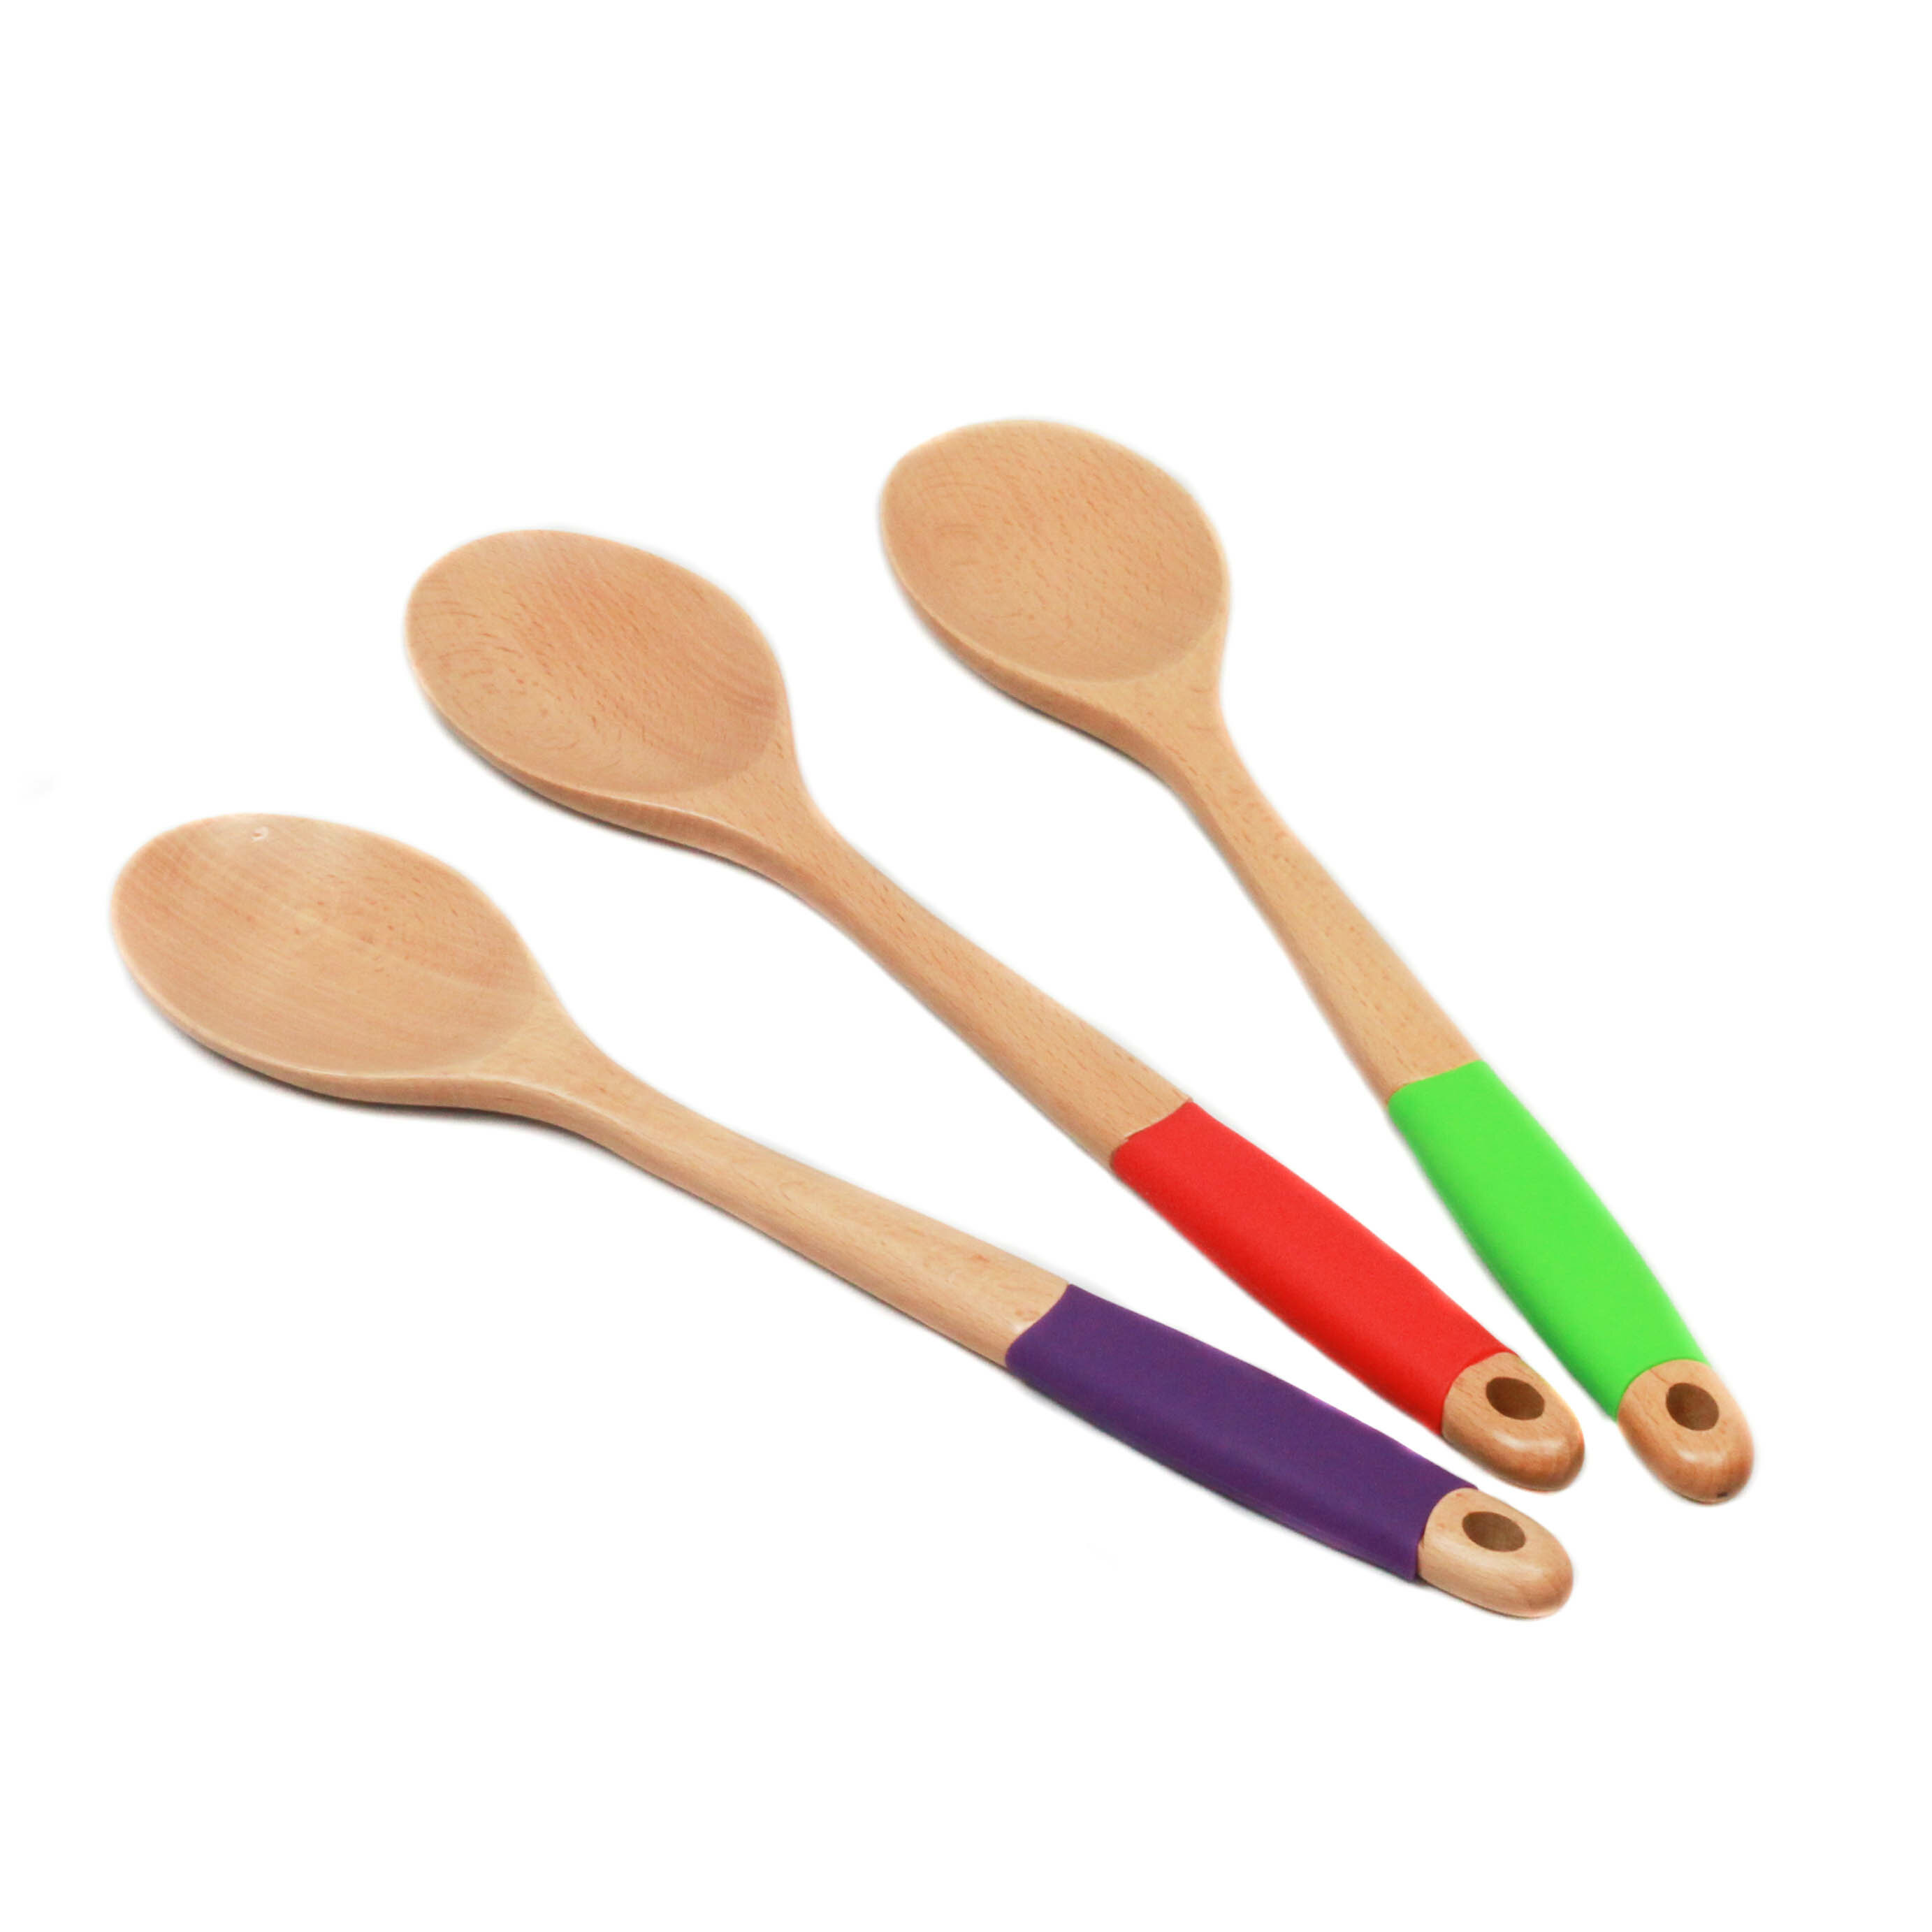 Kaluns Multi Color Utensils Wood and Silicone Cooking Utensil Set (Set of 21)